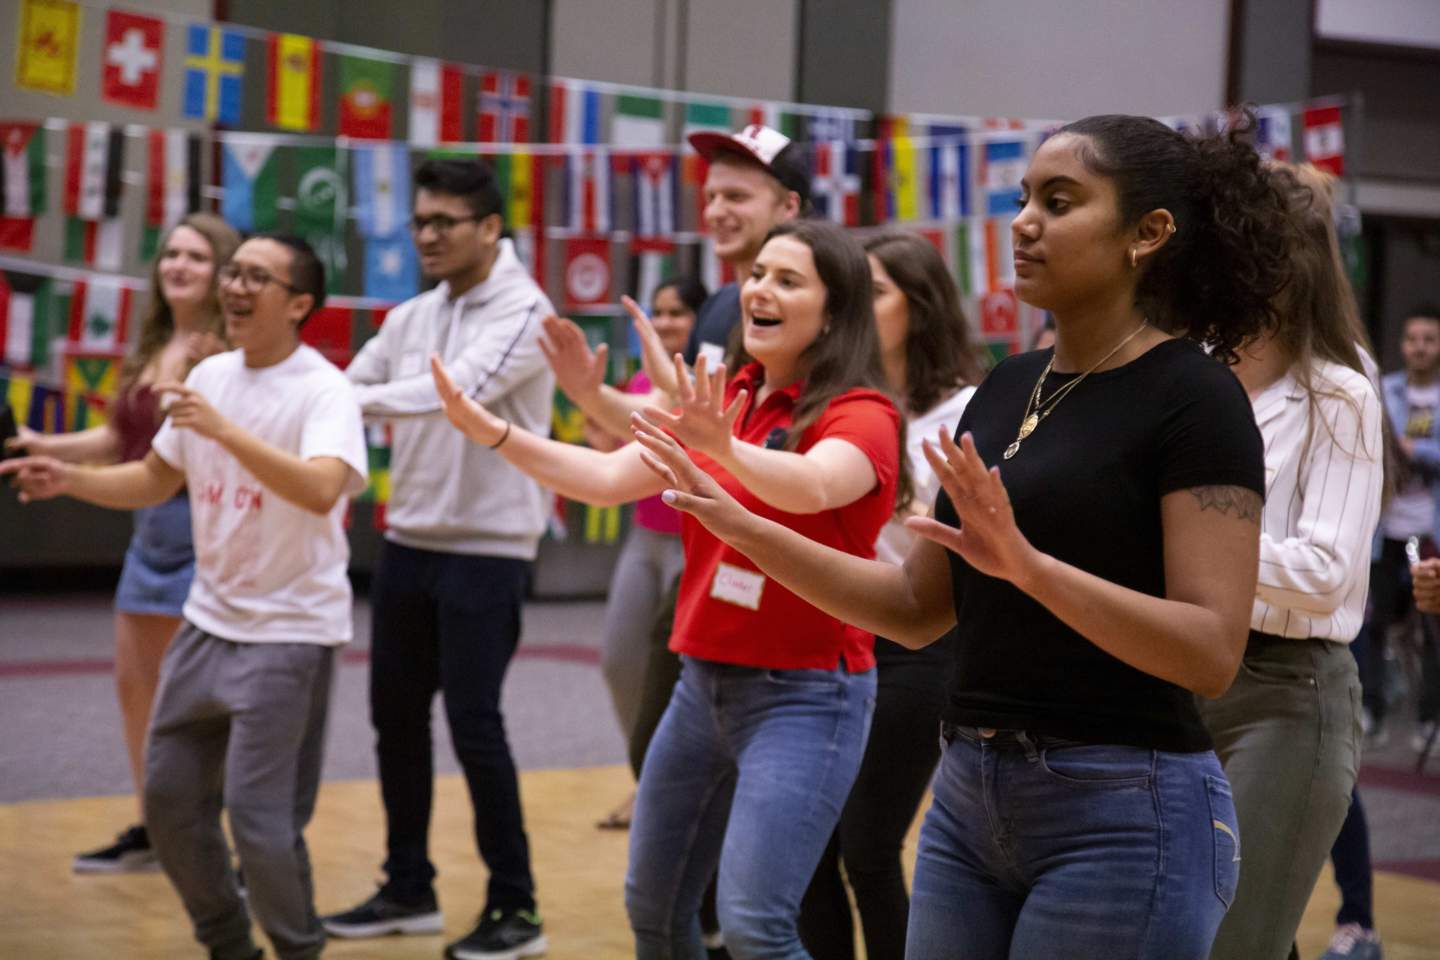 Students dancing at the International Student Welcome